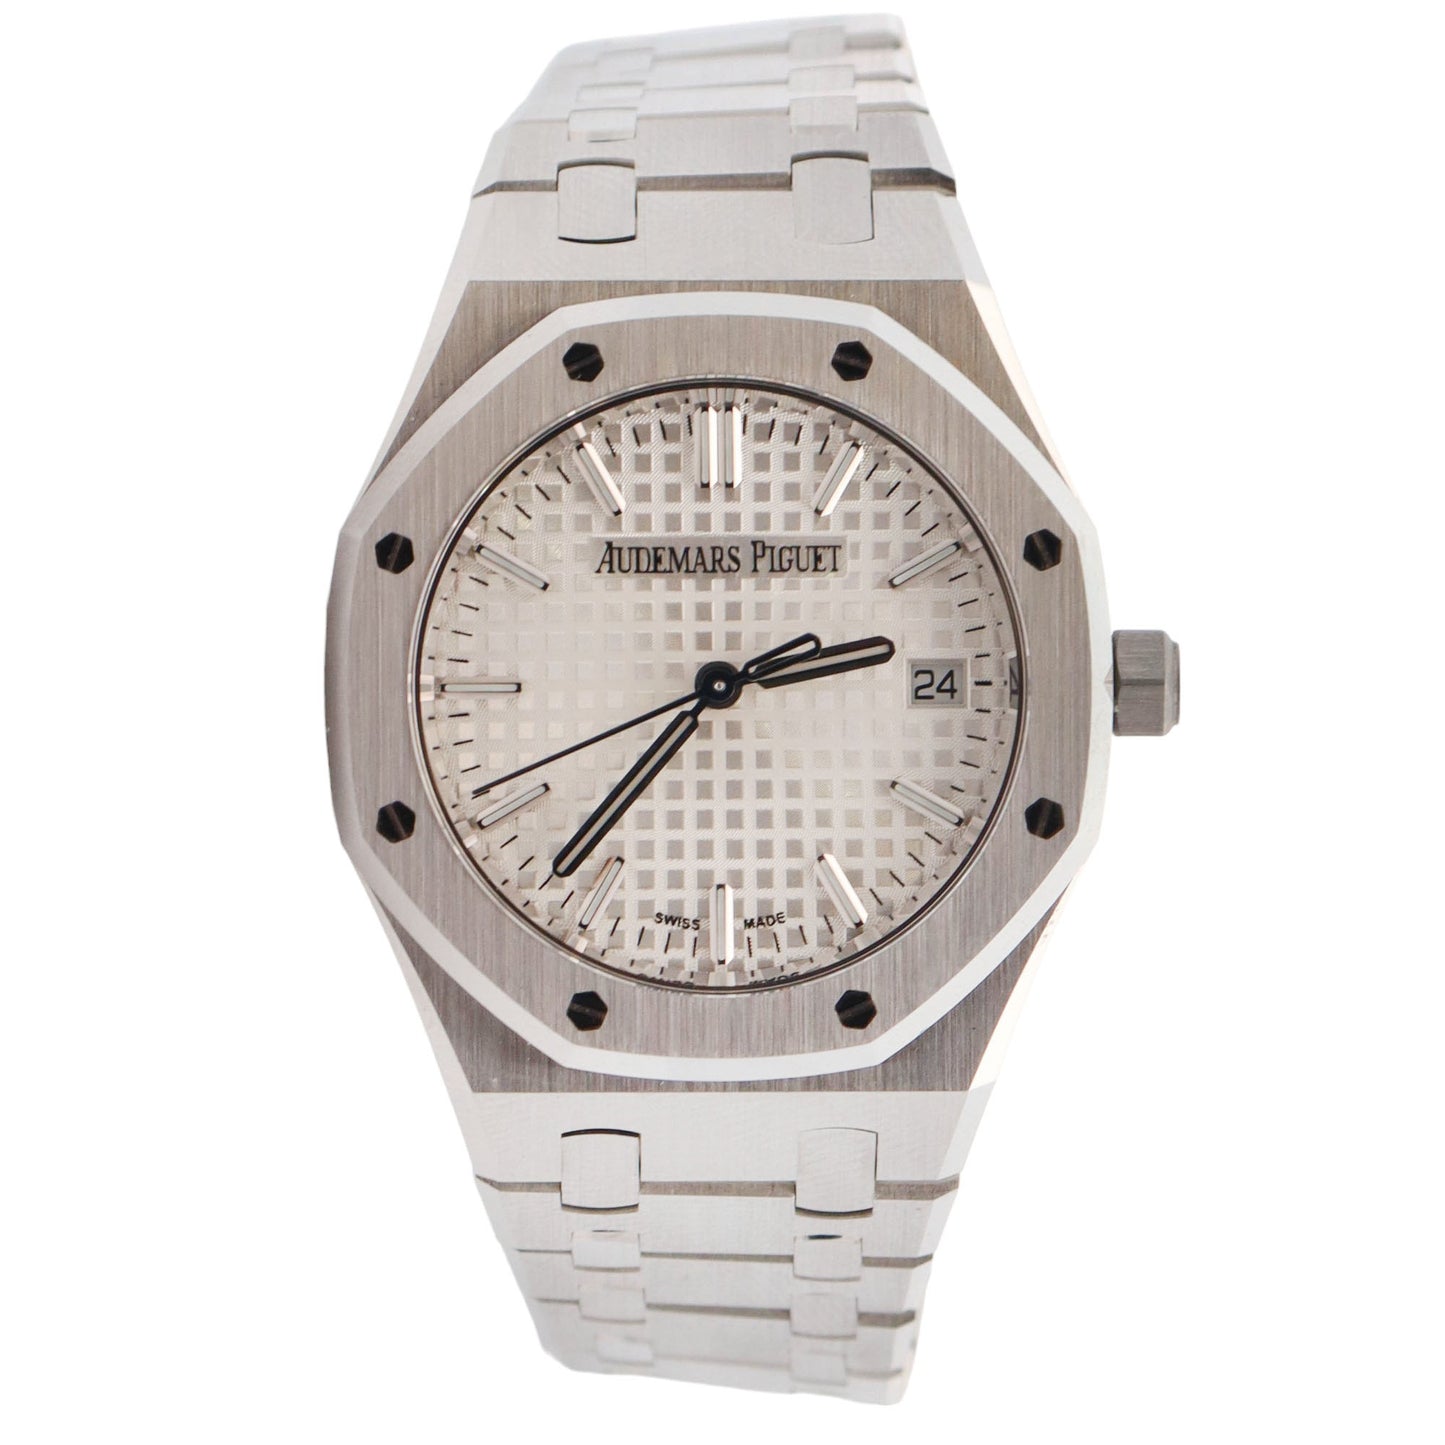 Audemars Piguet Royal Oak Stainless Steel 34mm White Stick Dial Watch Reference# 77450ST.OO.1361ST.02